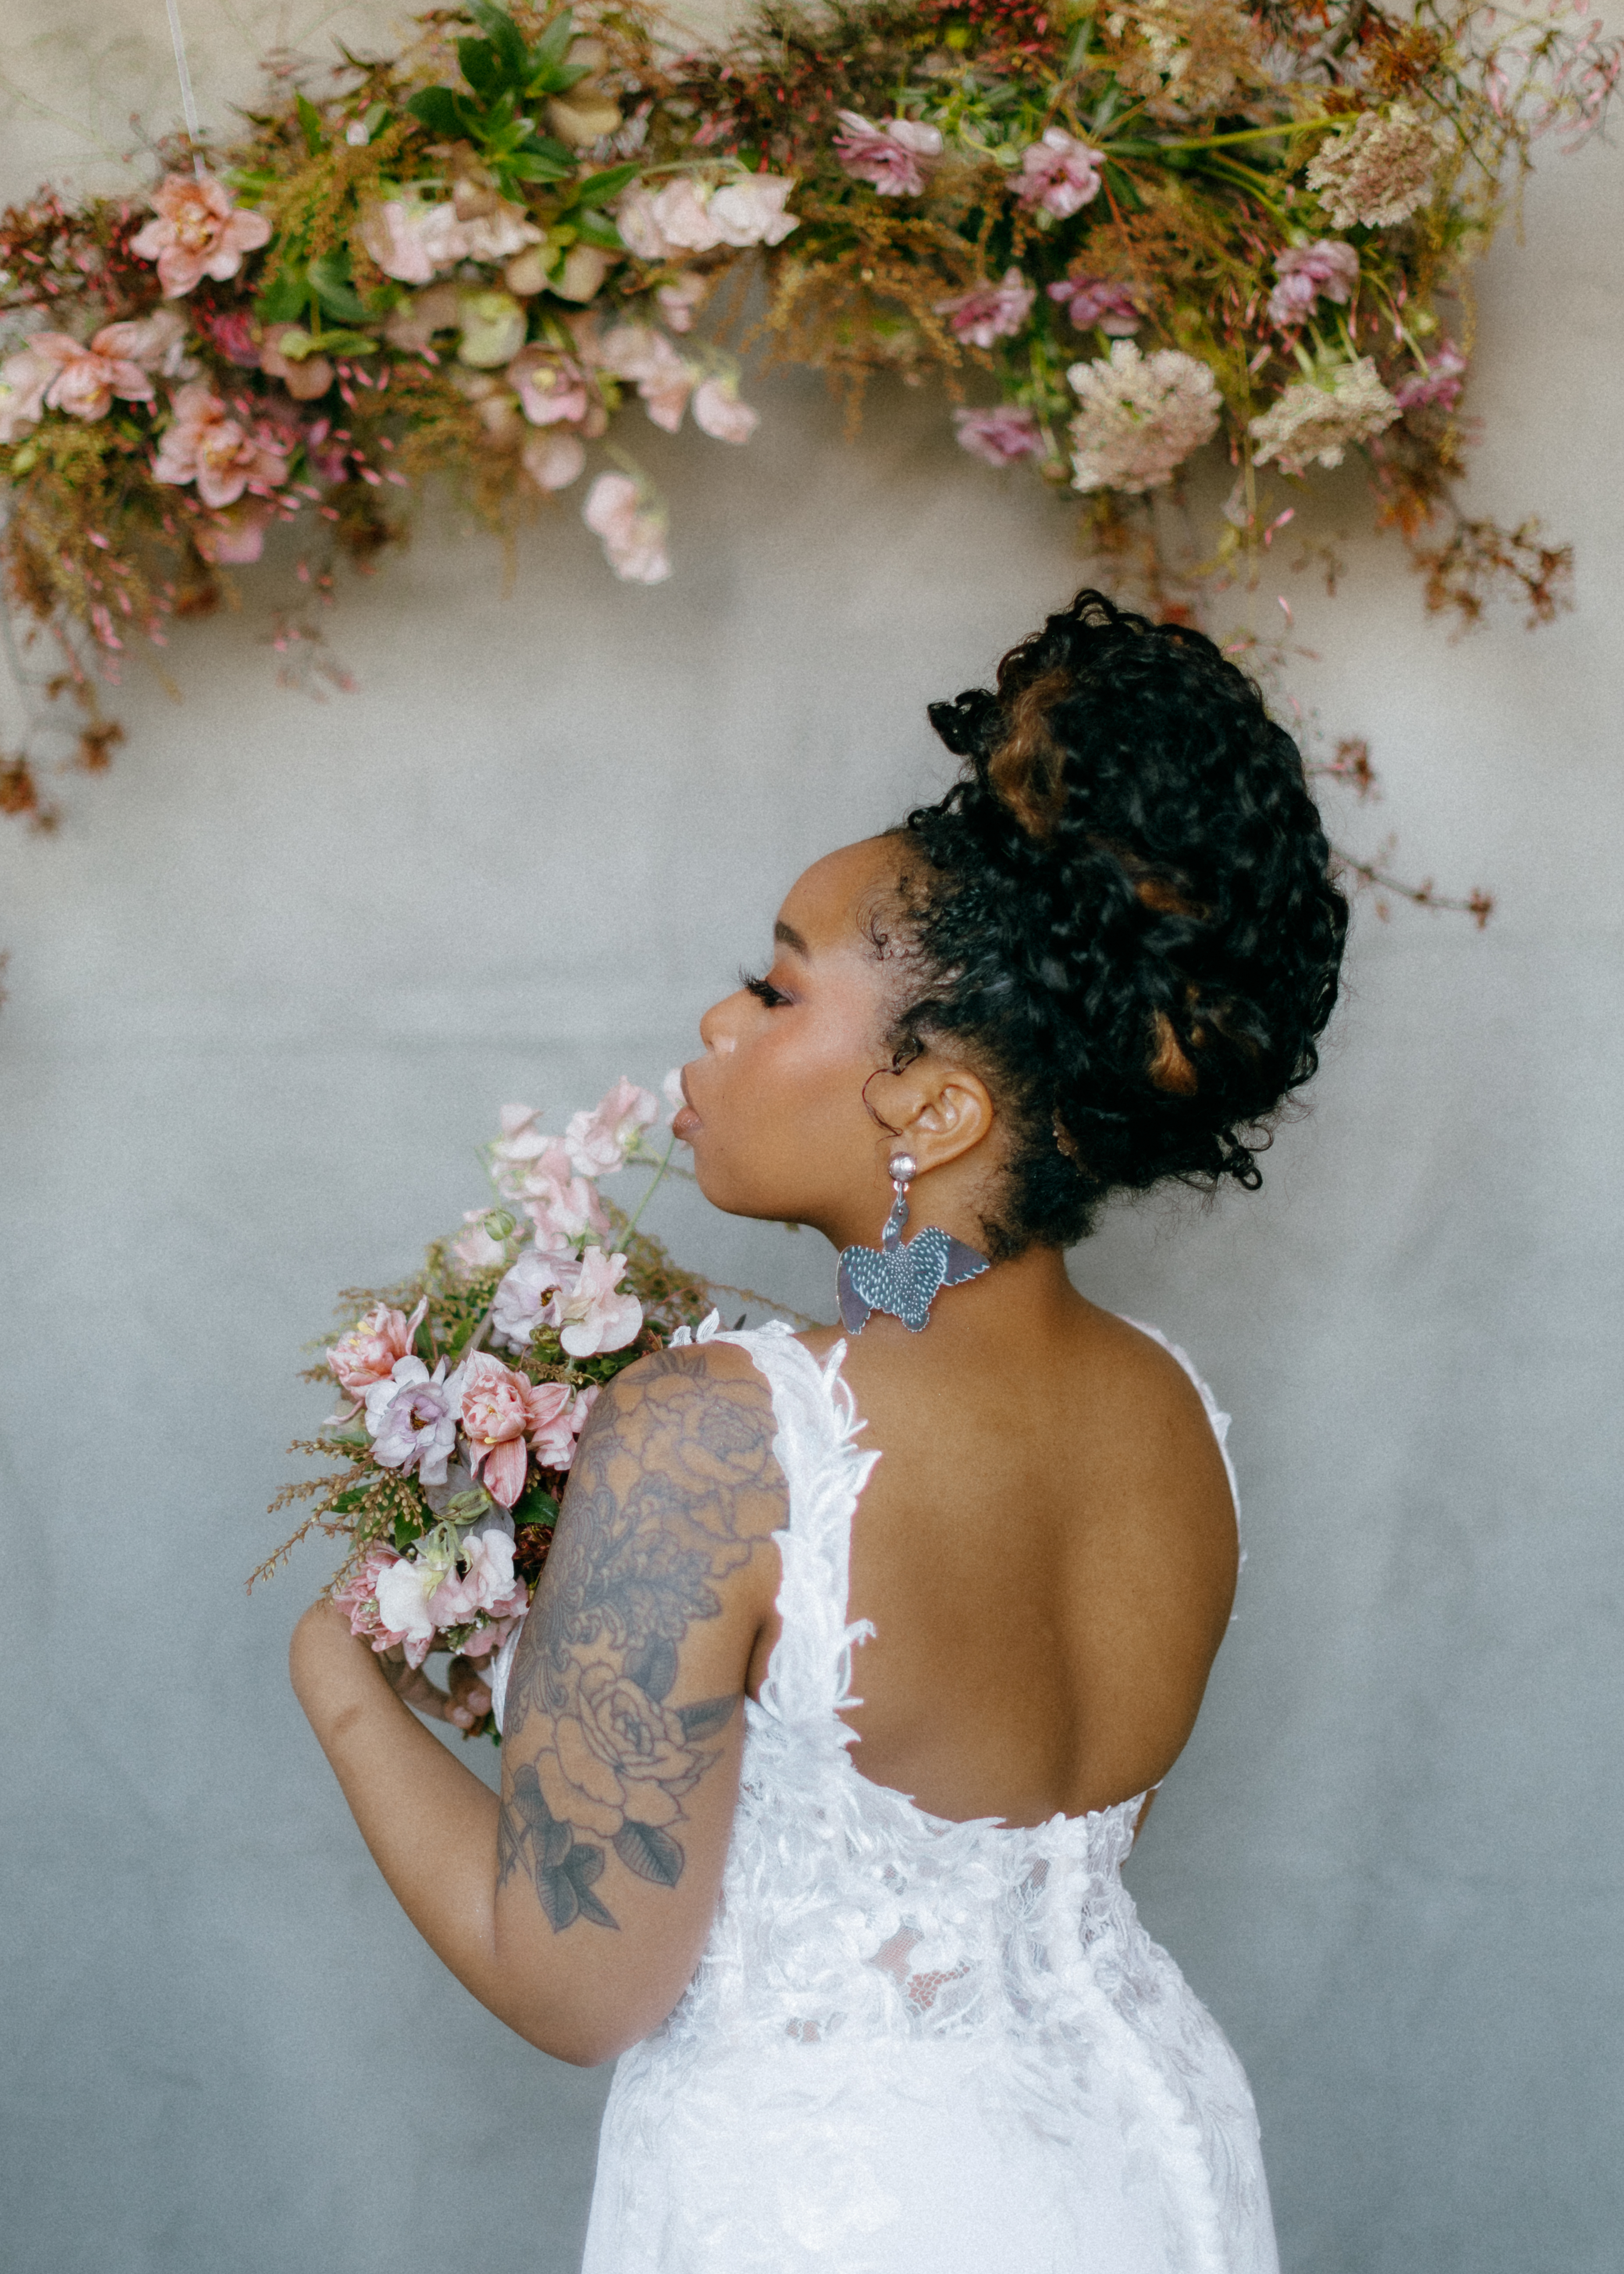 Ethereal Bridal Editorial with the Coolest Wedding Earrings